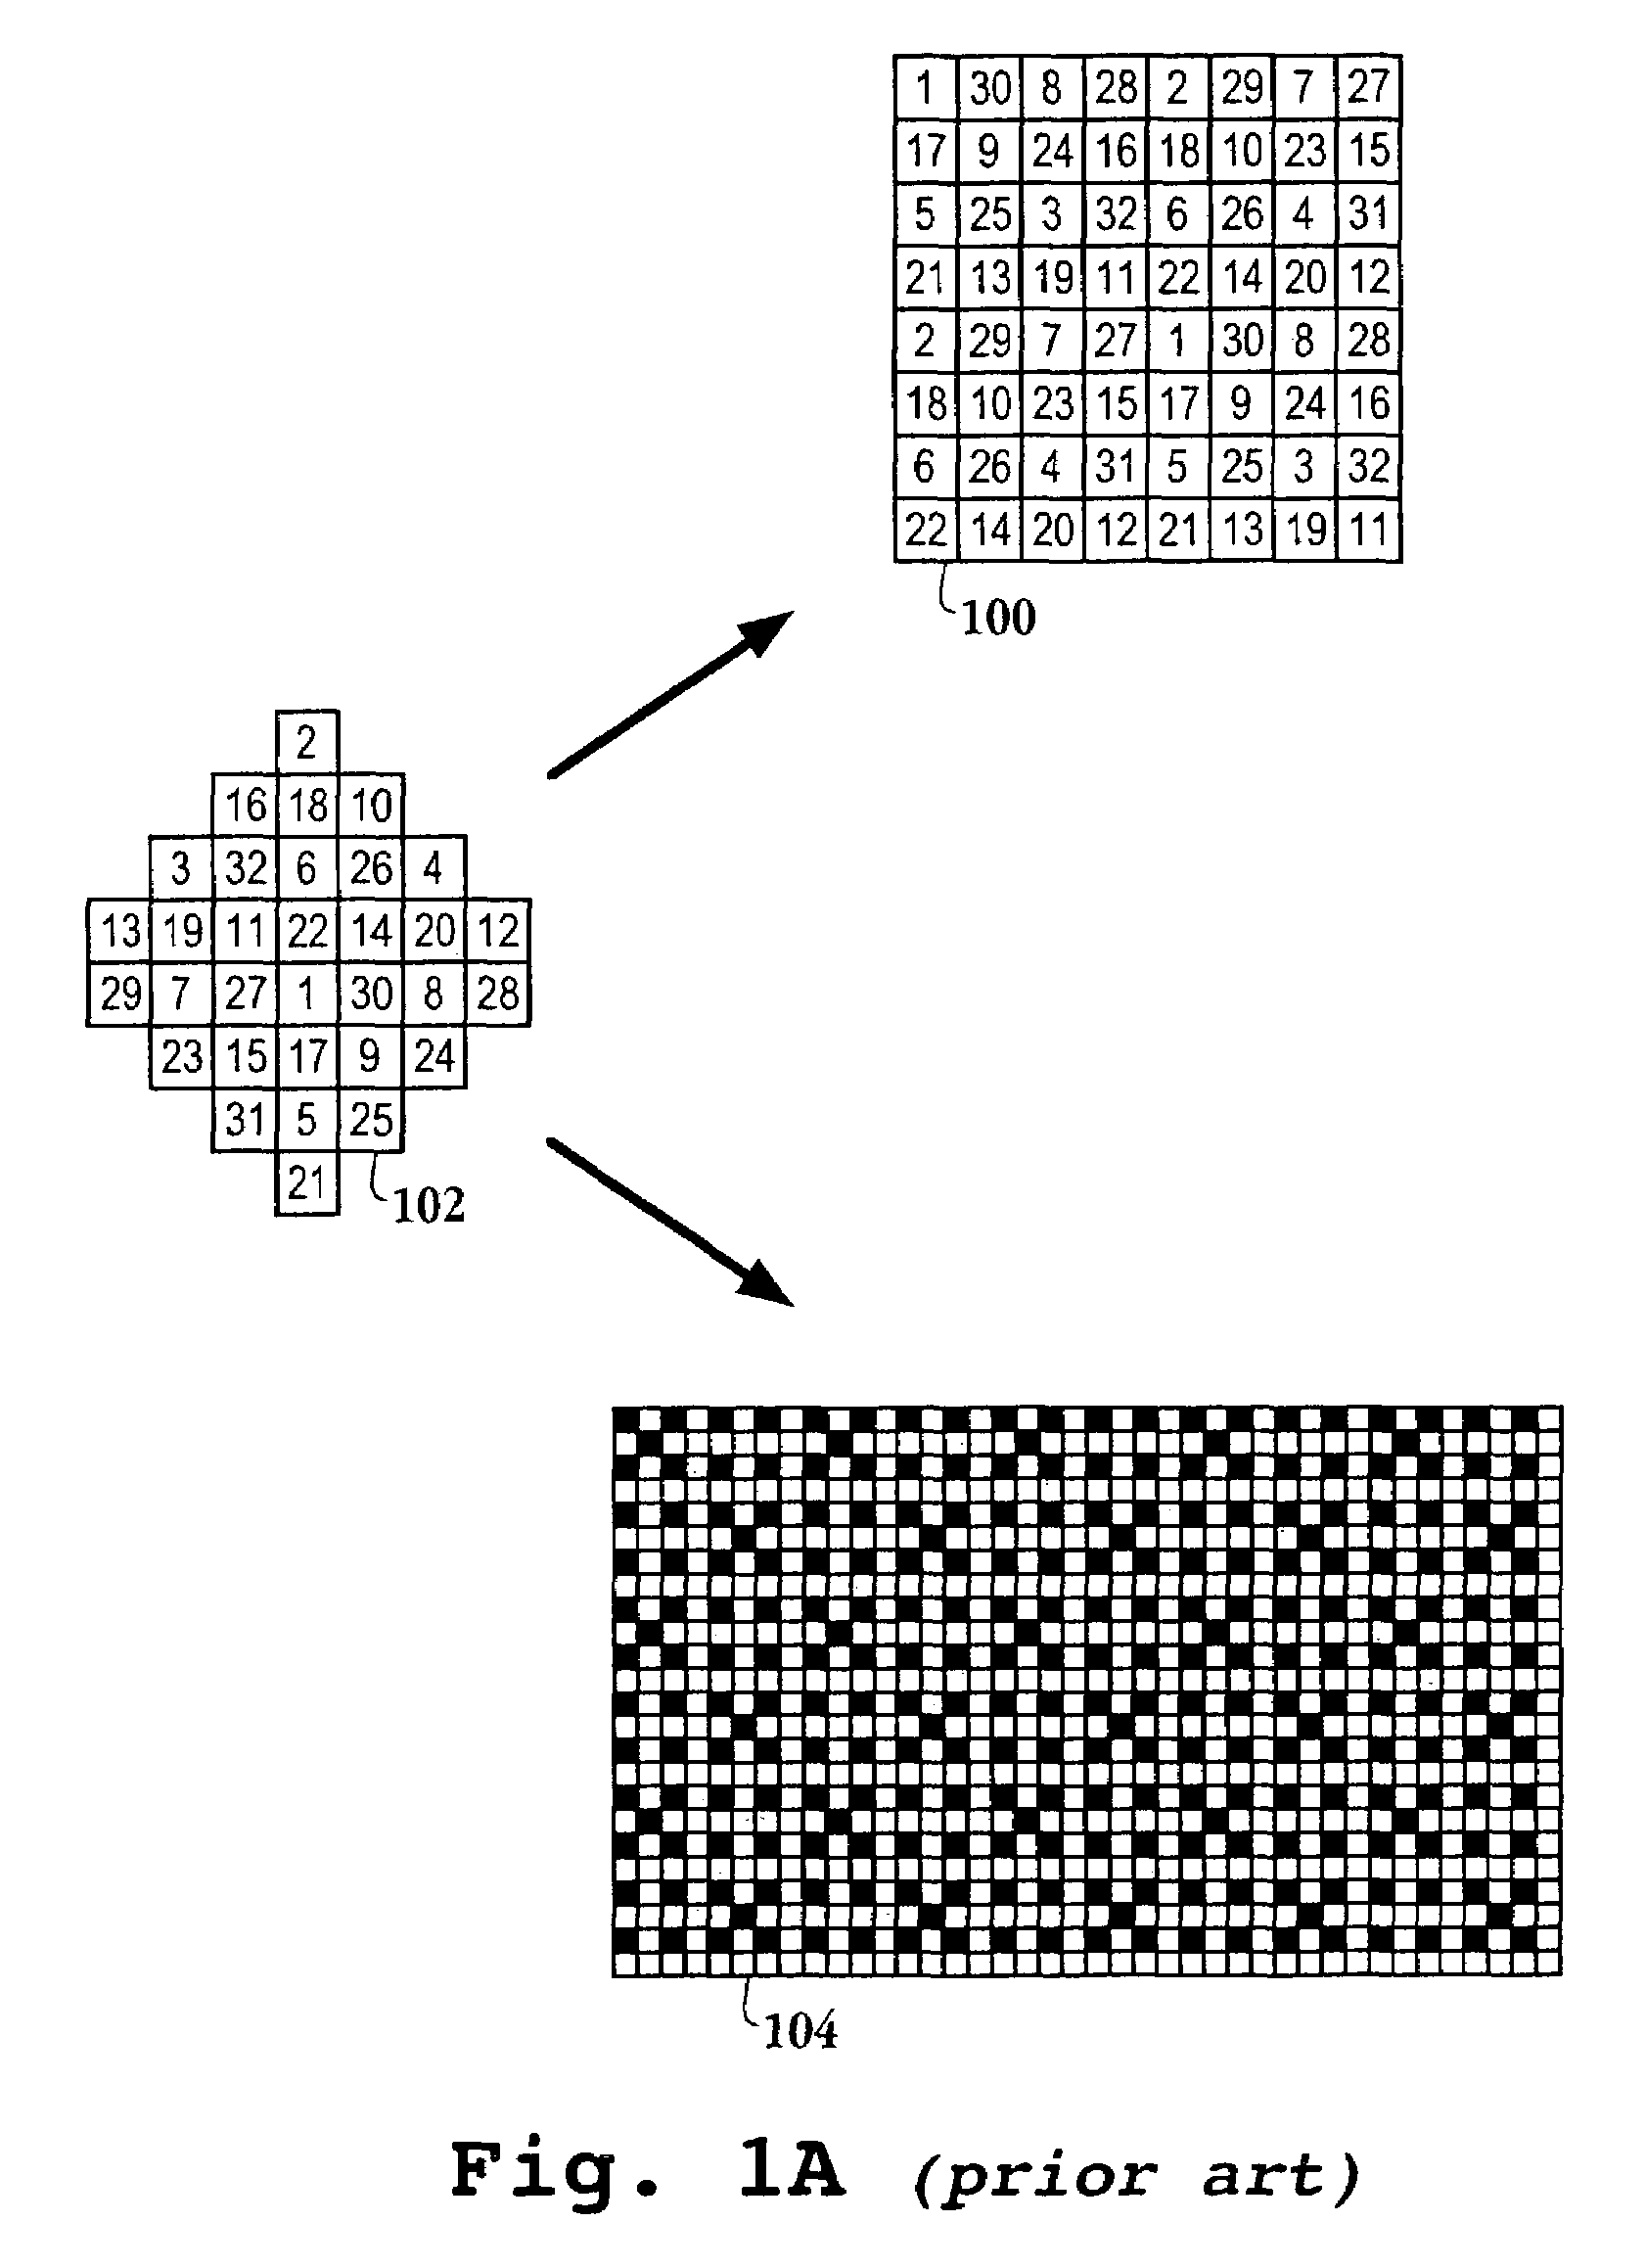 Method and apparatus for generating dispersed cluster screen